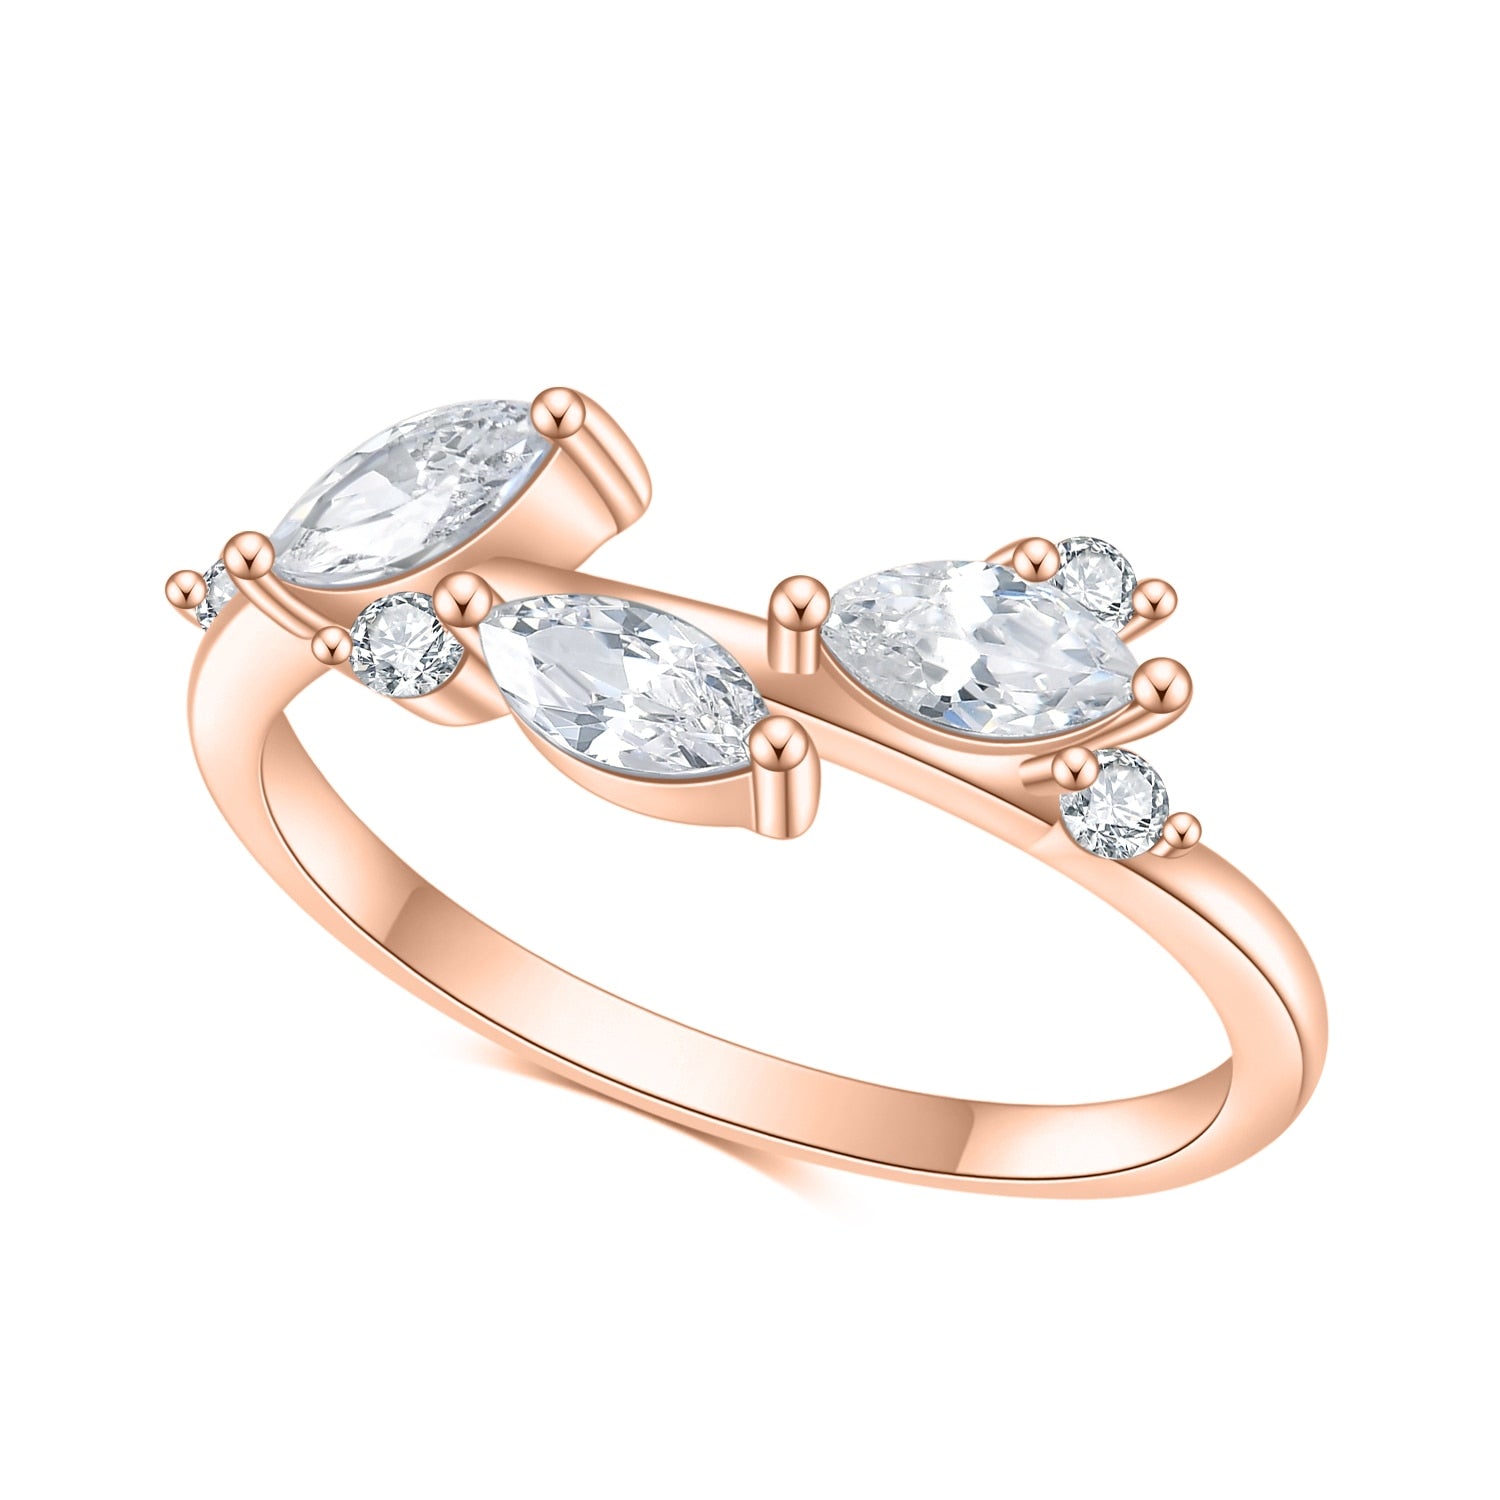 A rose gold wedding ring with three marquise moissanite set like leaves.